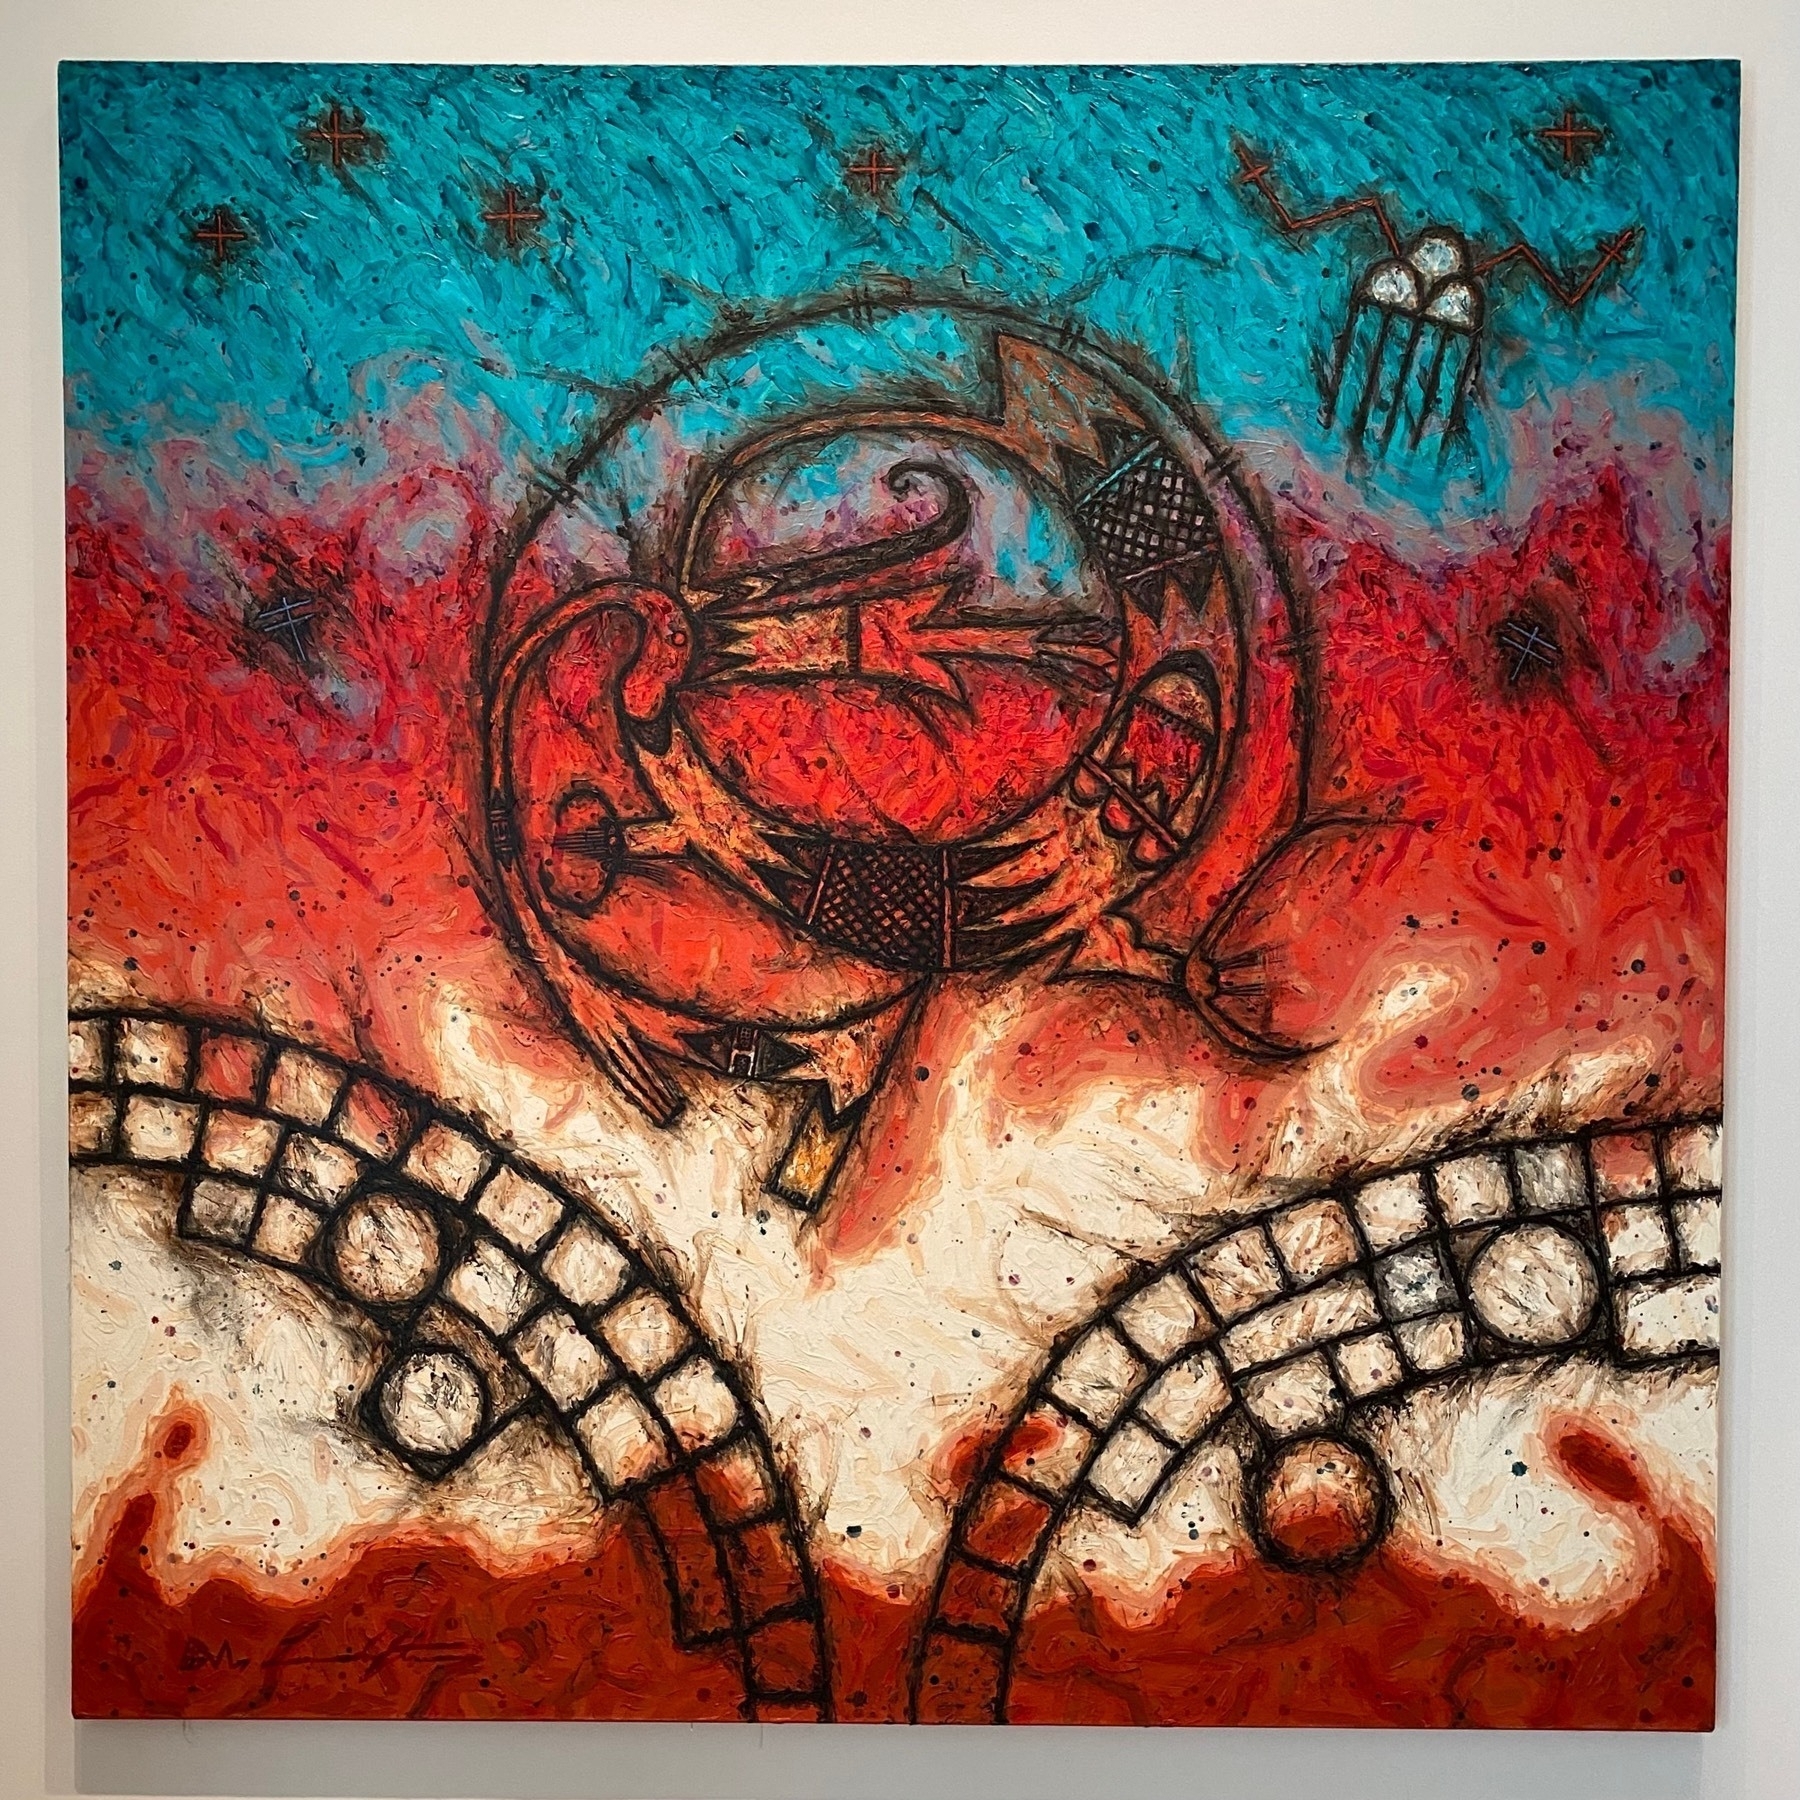 Dan V. Lomahaftewa, Dream of Ancient Life, 1995, painting of bird symbols against a bright red and blue background.